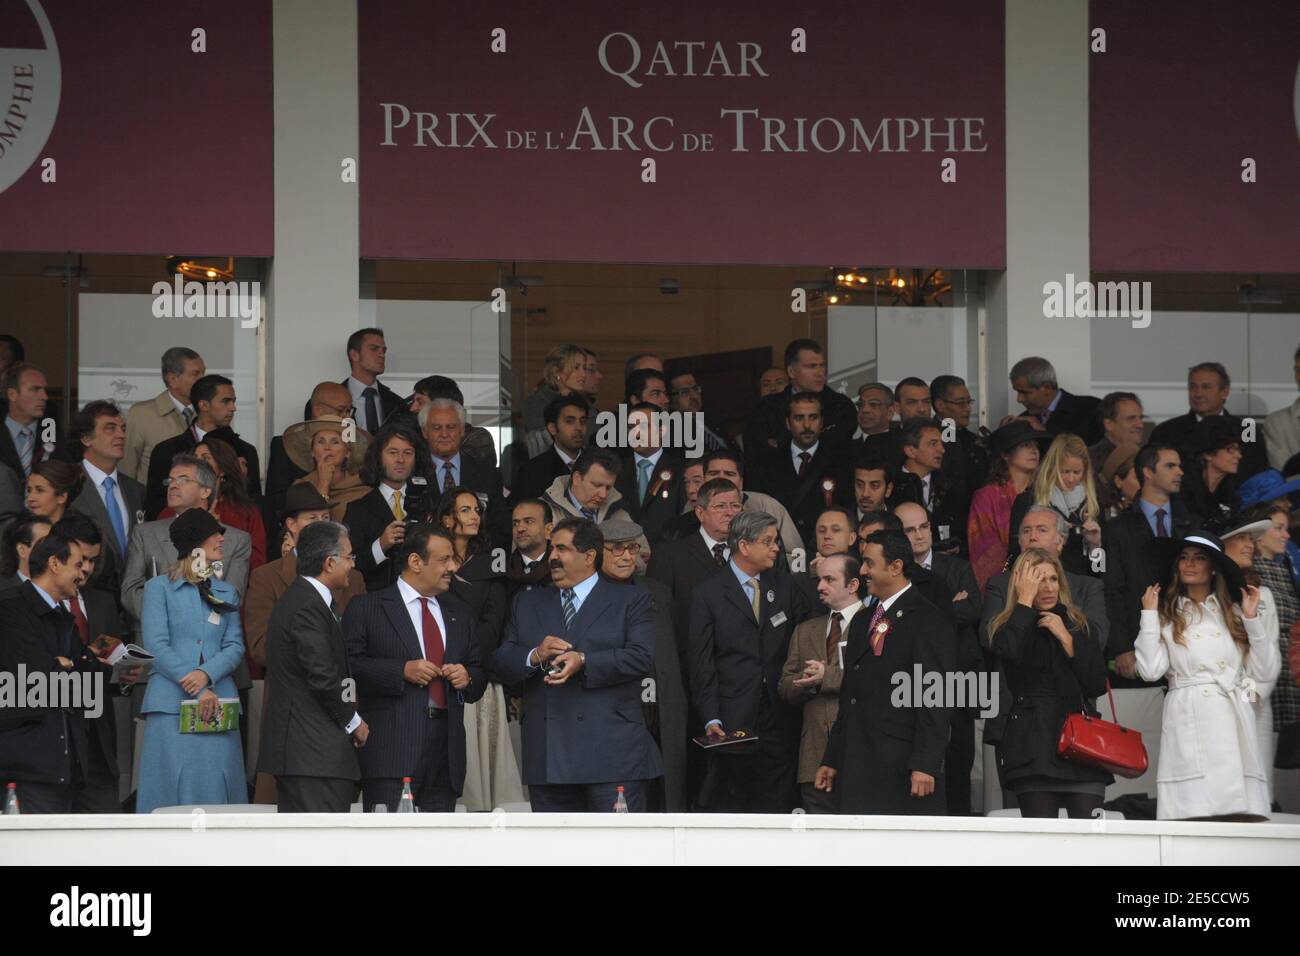 Qatar's Emir Sheikh Hamad Bin Khalifa Al Thani (C) is seen at the 'Presidential Stand' at 87th Arc de Triomphe horserace, one of the world's richest races, at Longchamp Racecourse, near Paris, France, on October 5, 2008. The race, that was sponsored by Qatar for the first time, was won by Aga Khan's horse Zarkava. Photo by Ammar Abd Rabbo/ABACAPRESS.COM Stock Photo